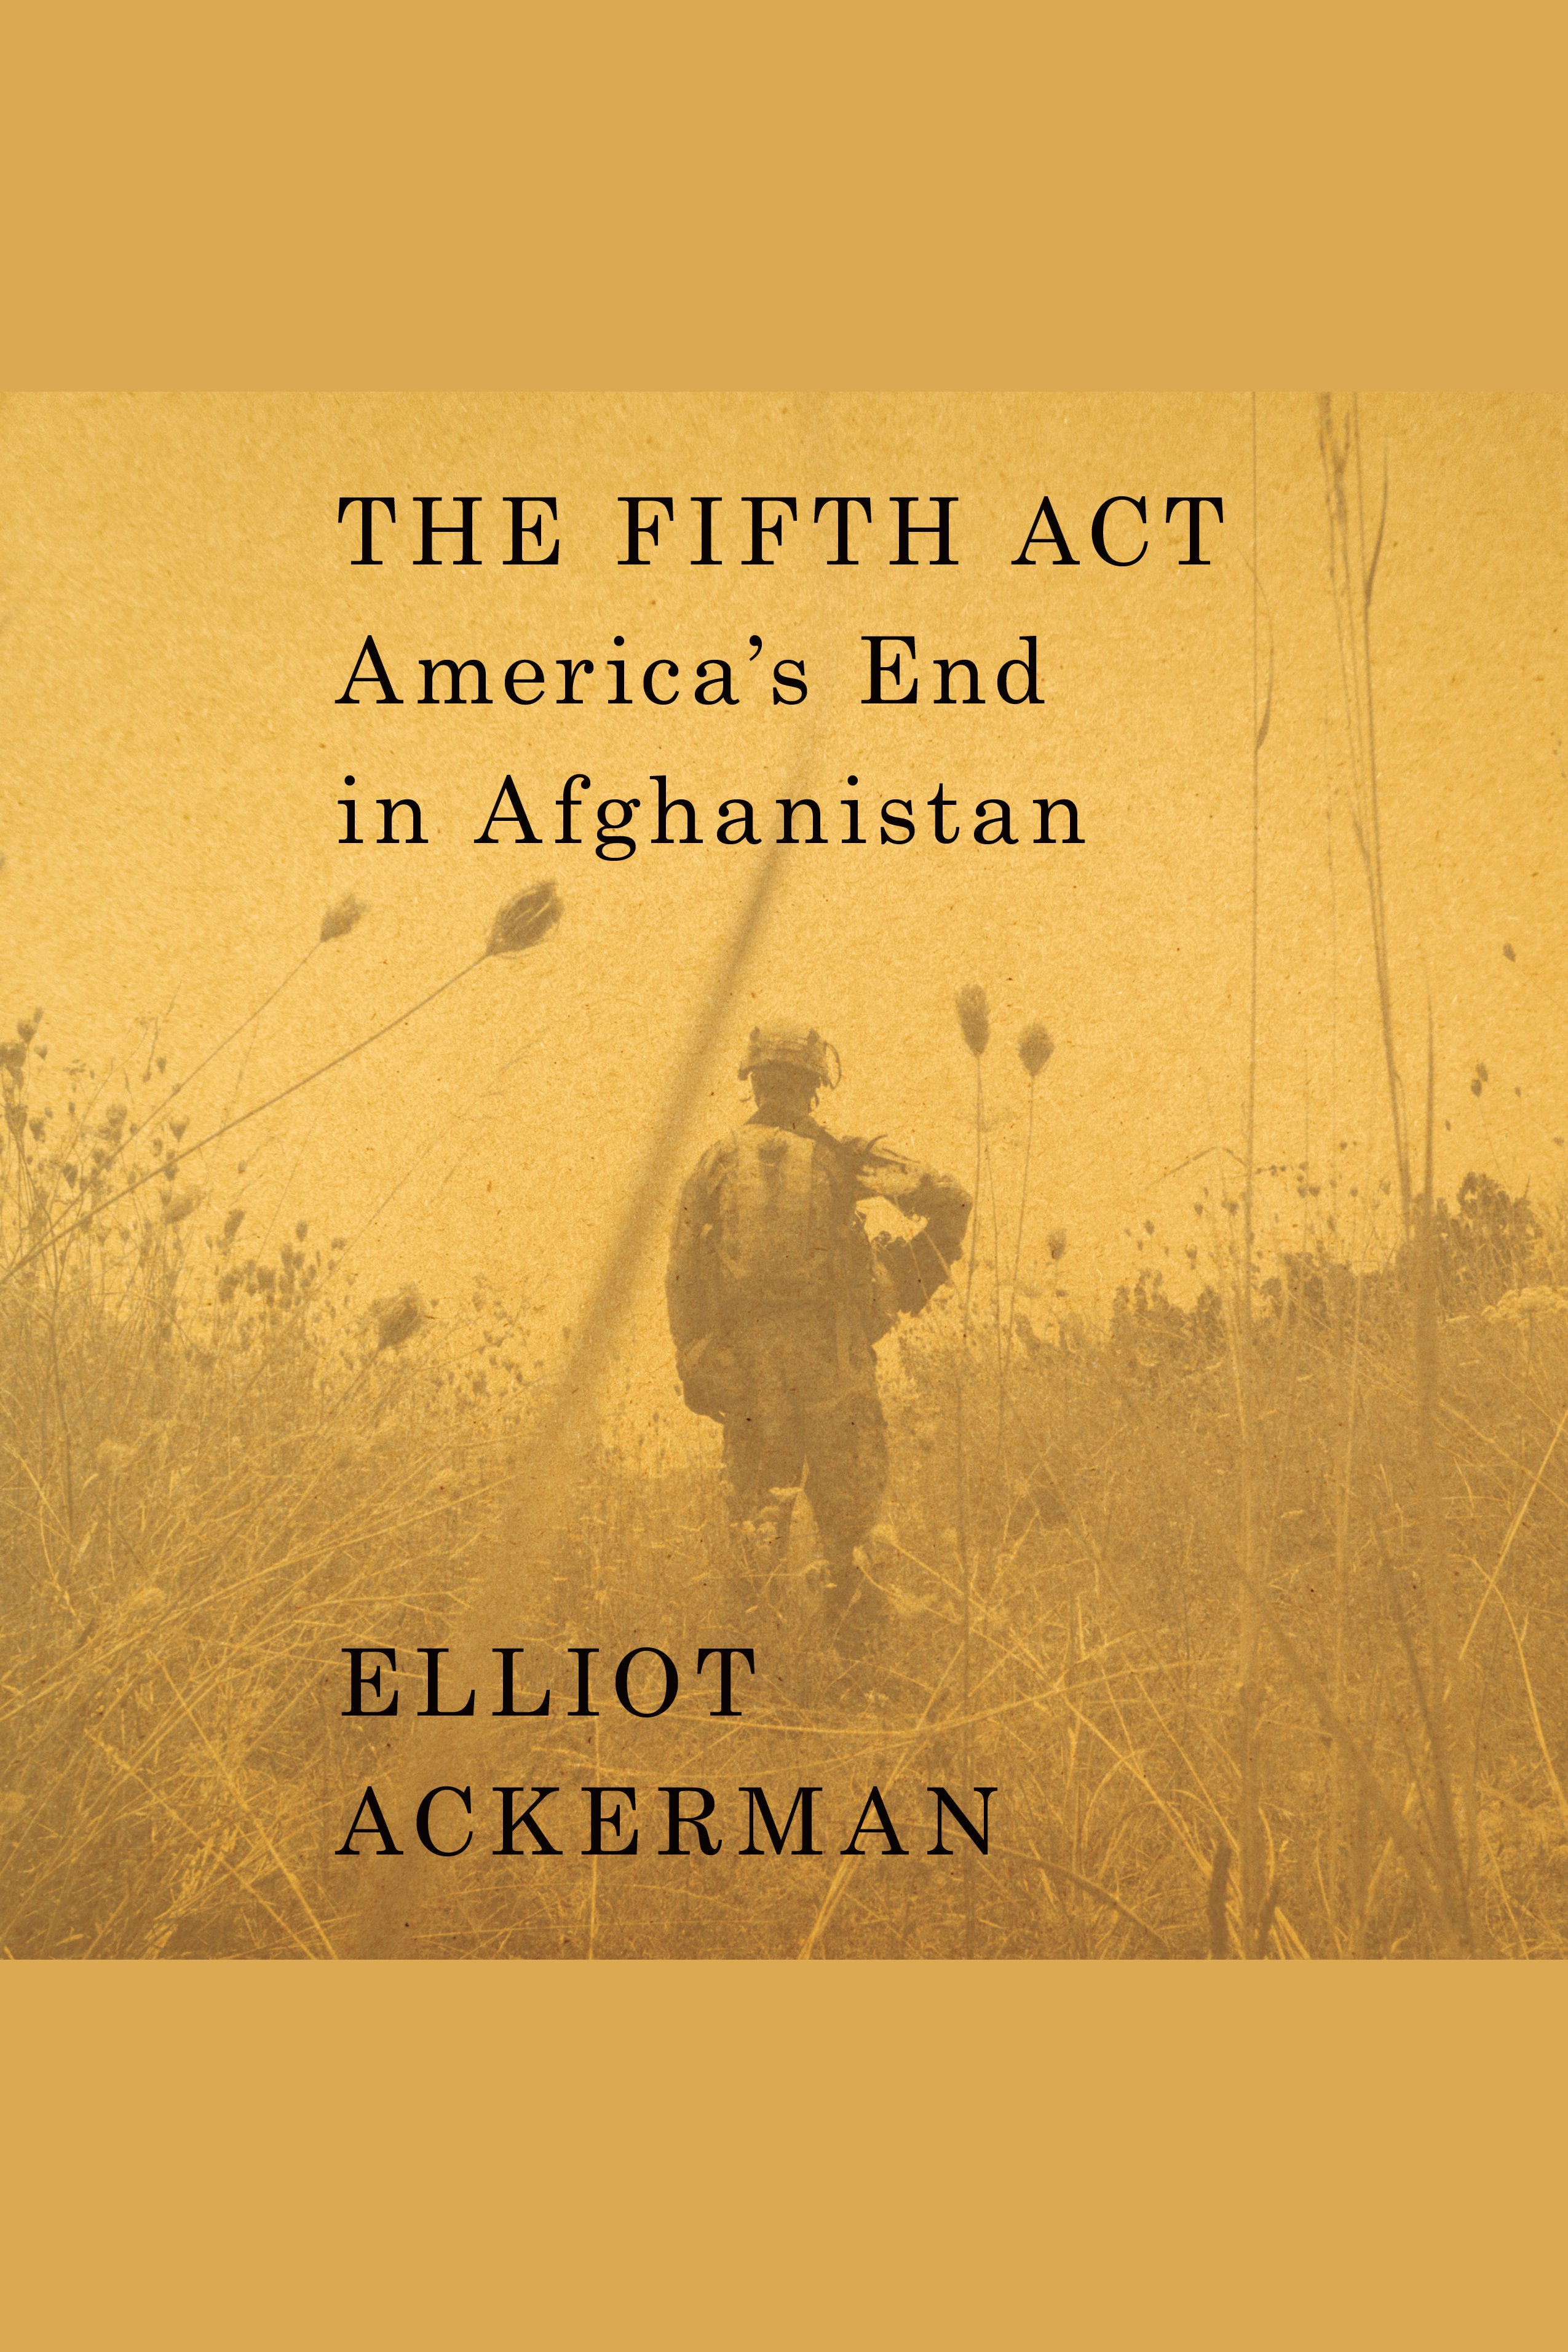 Cover Image of The Fifth Act